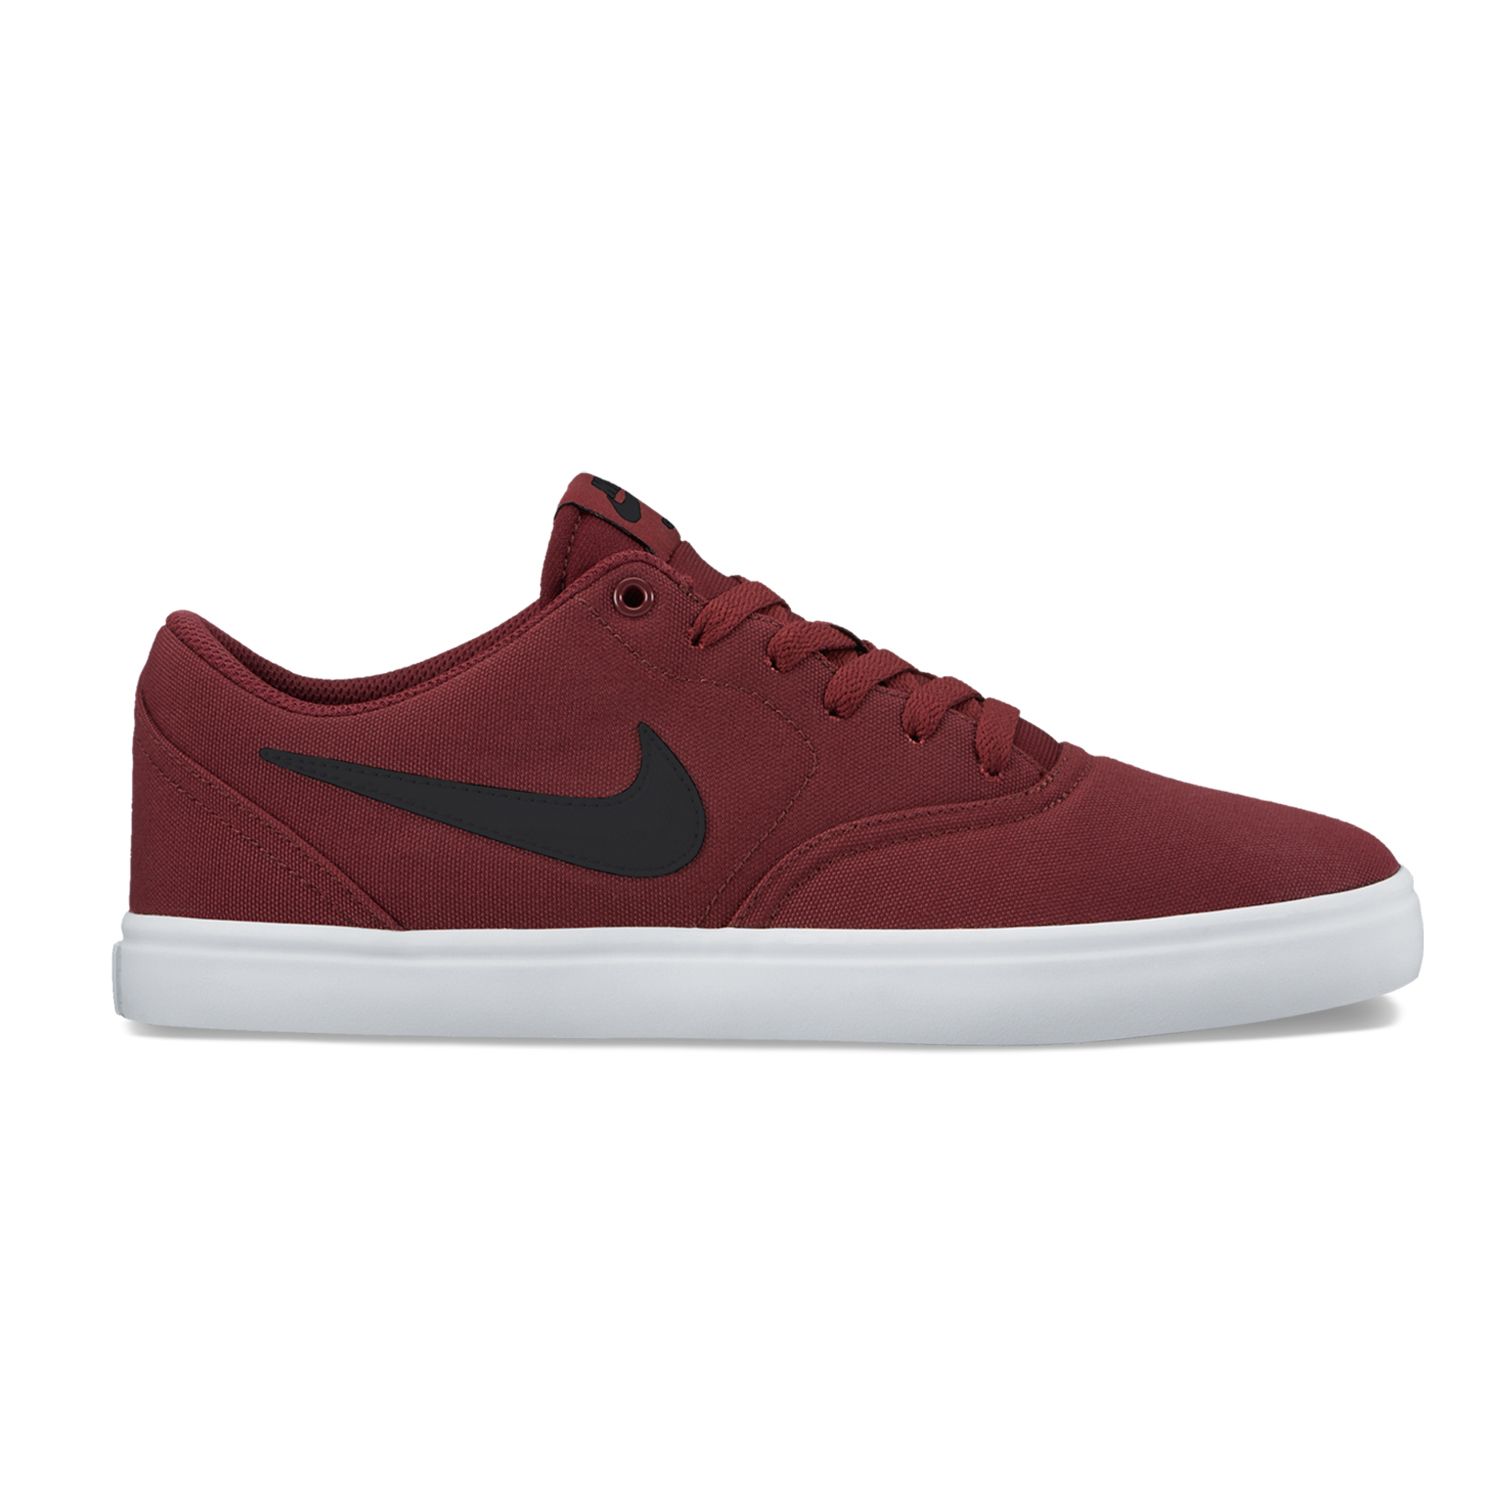 nike sb shoes red and black